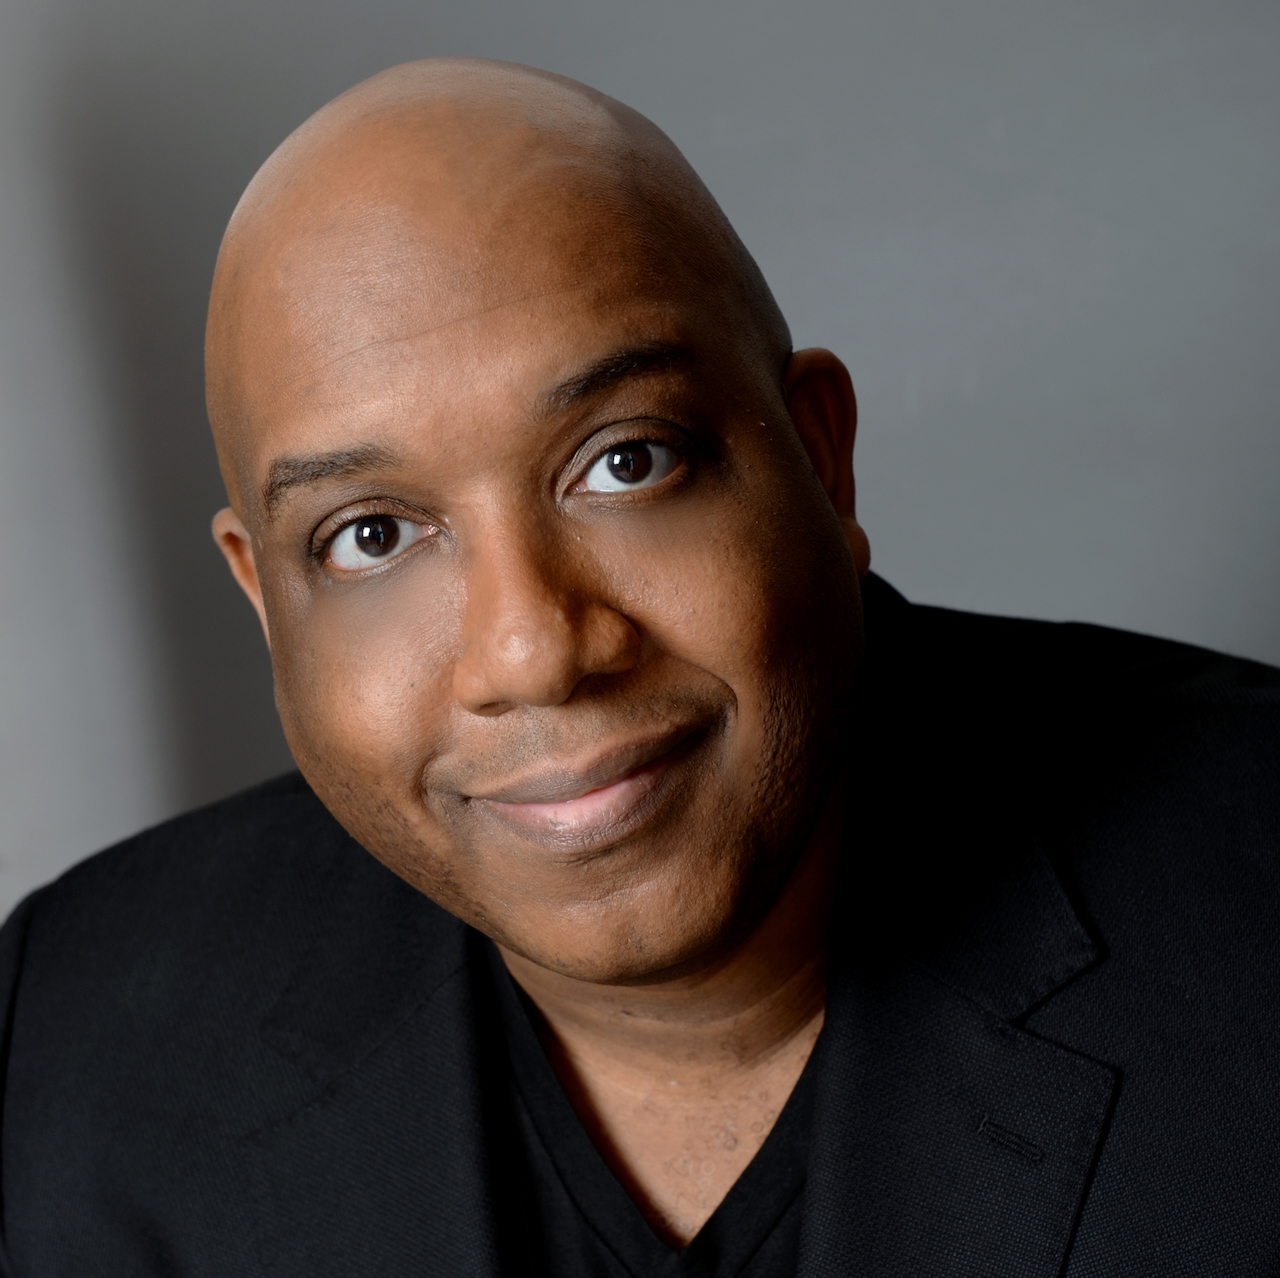 Omar L. Harris is Intent Consulting and TYMPO.io Founder, a Former GM (GSK and Allergan), Business and Servant Leadership Thought-Leader, Speaker, and Award-Winning and Bestselling Author of 5 books.